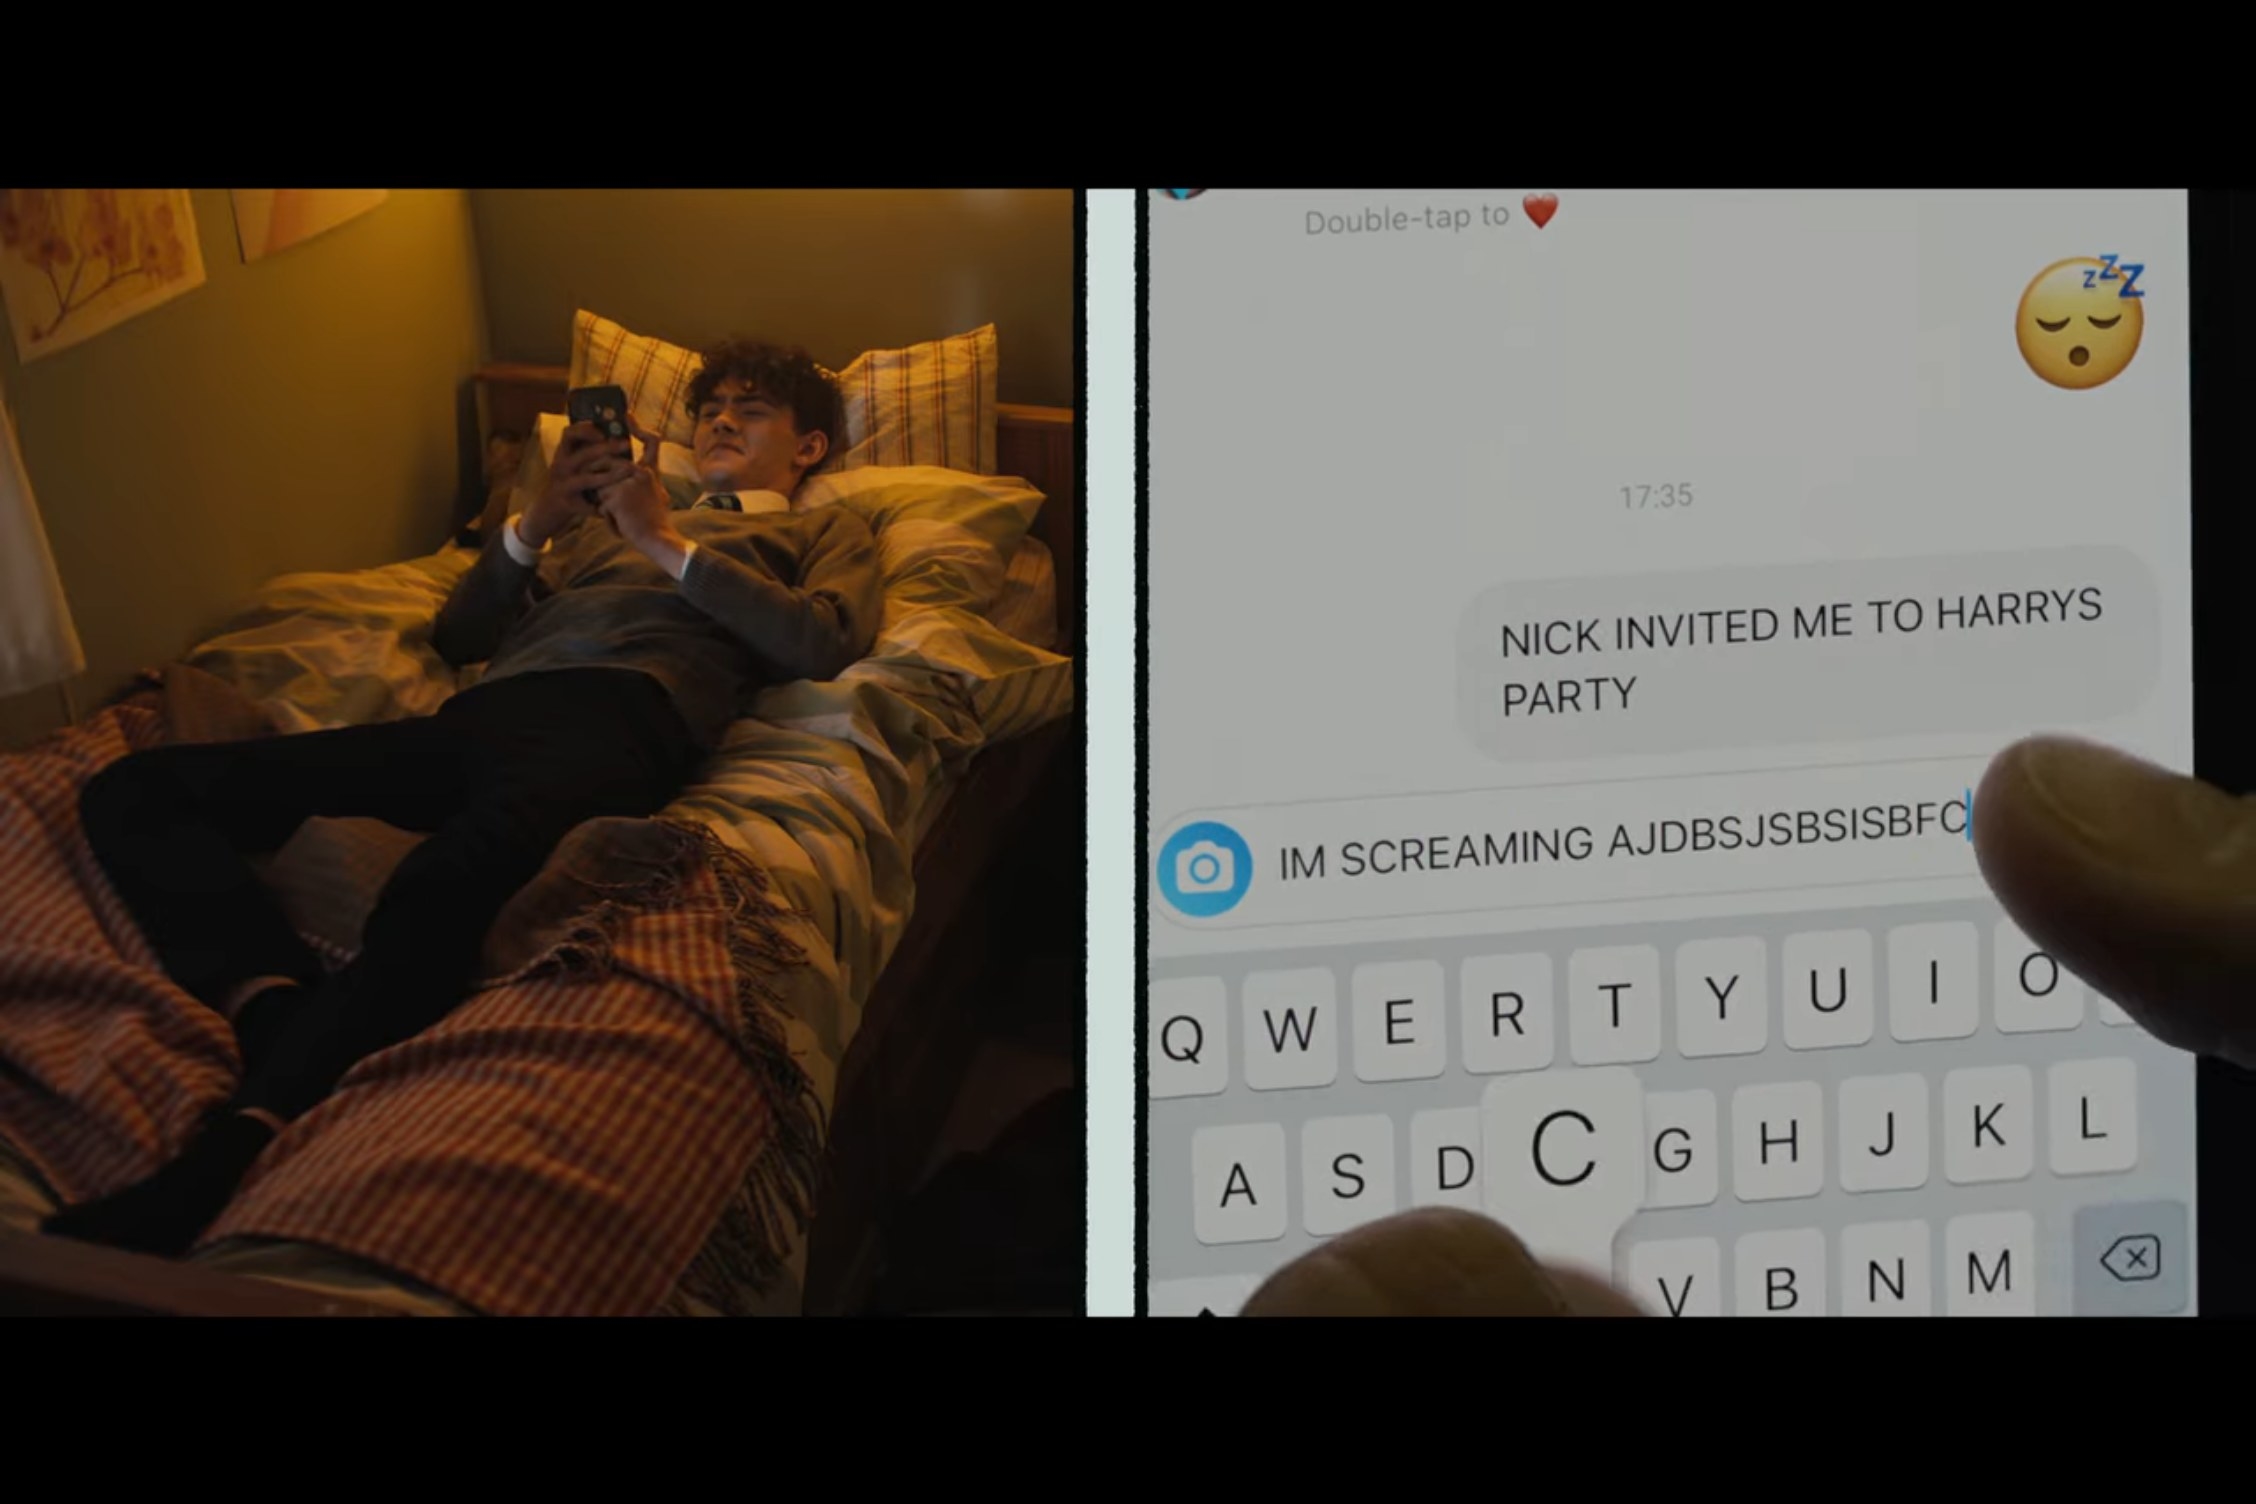 Charlie sits in bed with his phone and tests, &quot;Nick invited me to Harry&#x27;s party! I&#x27;M SCREAMING&quot; and then a big keyboard smash